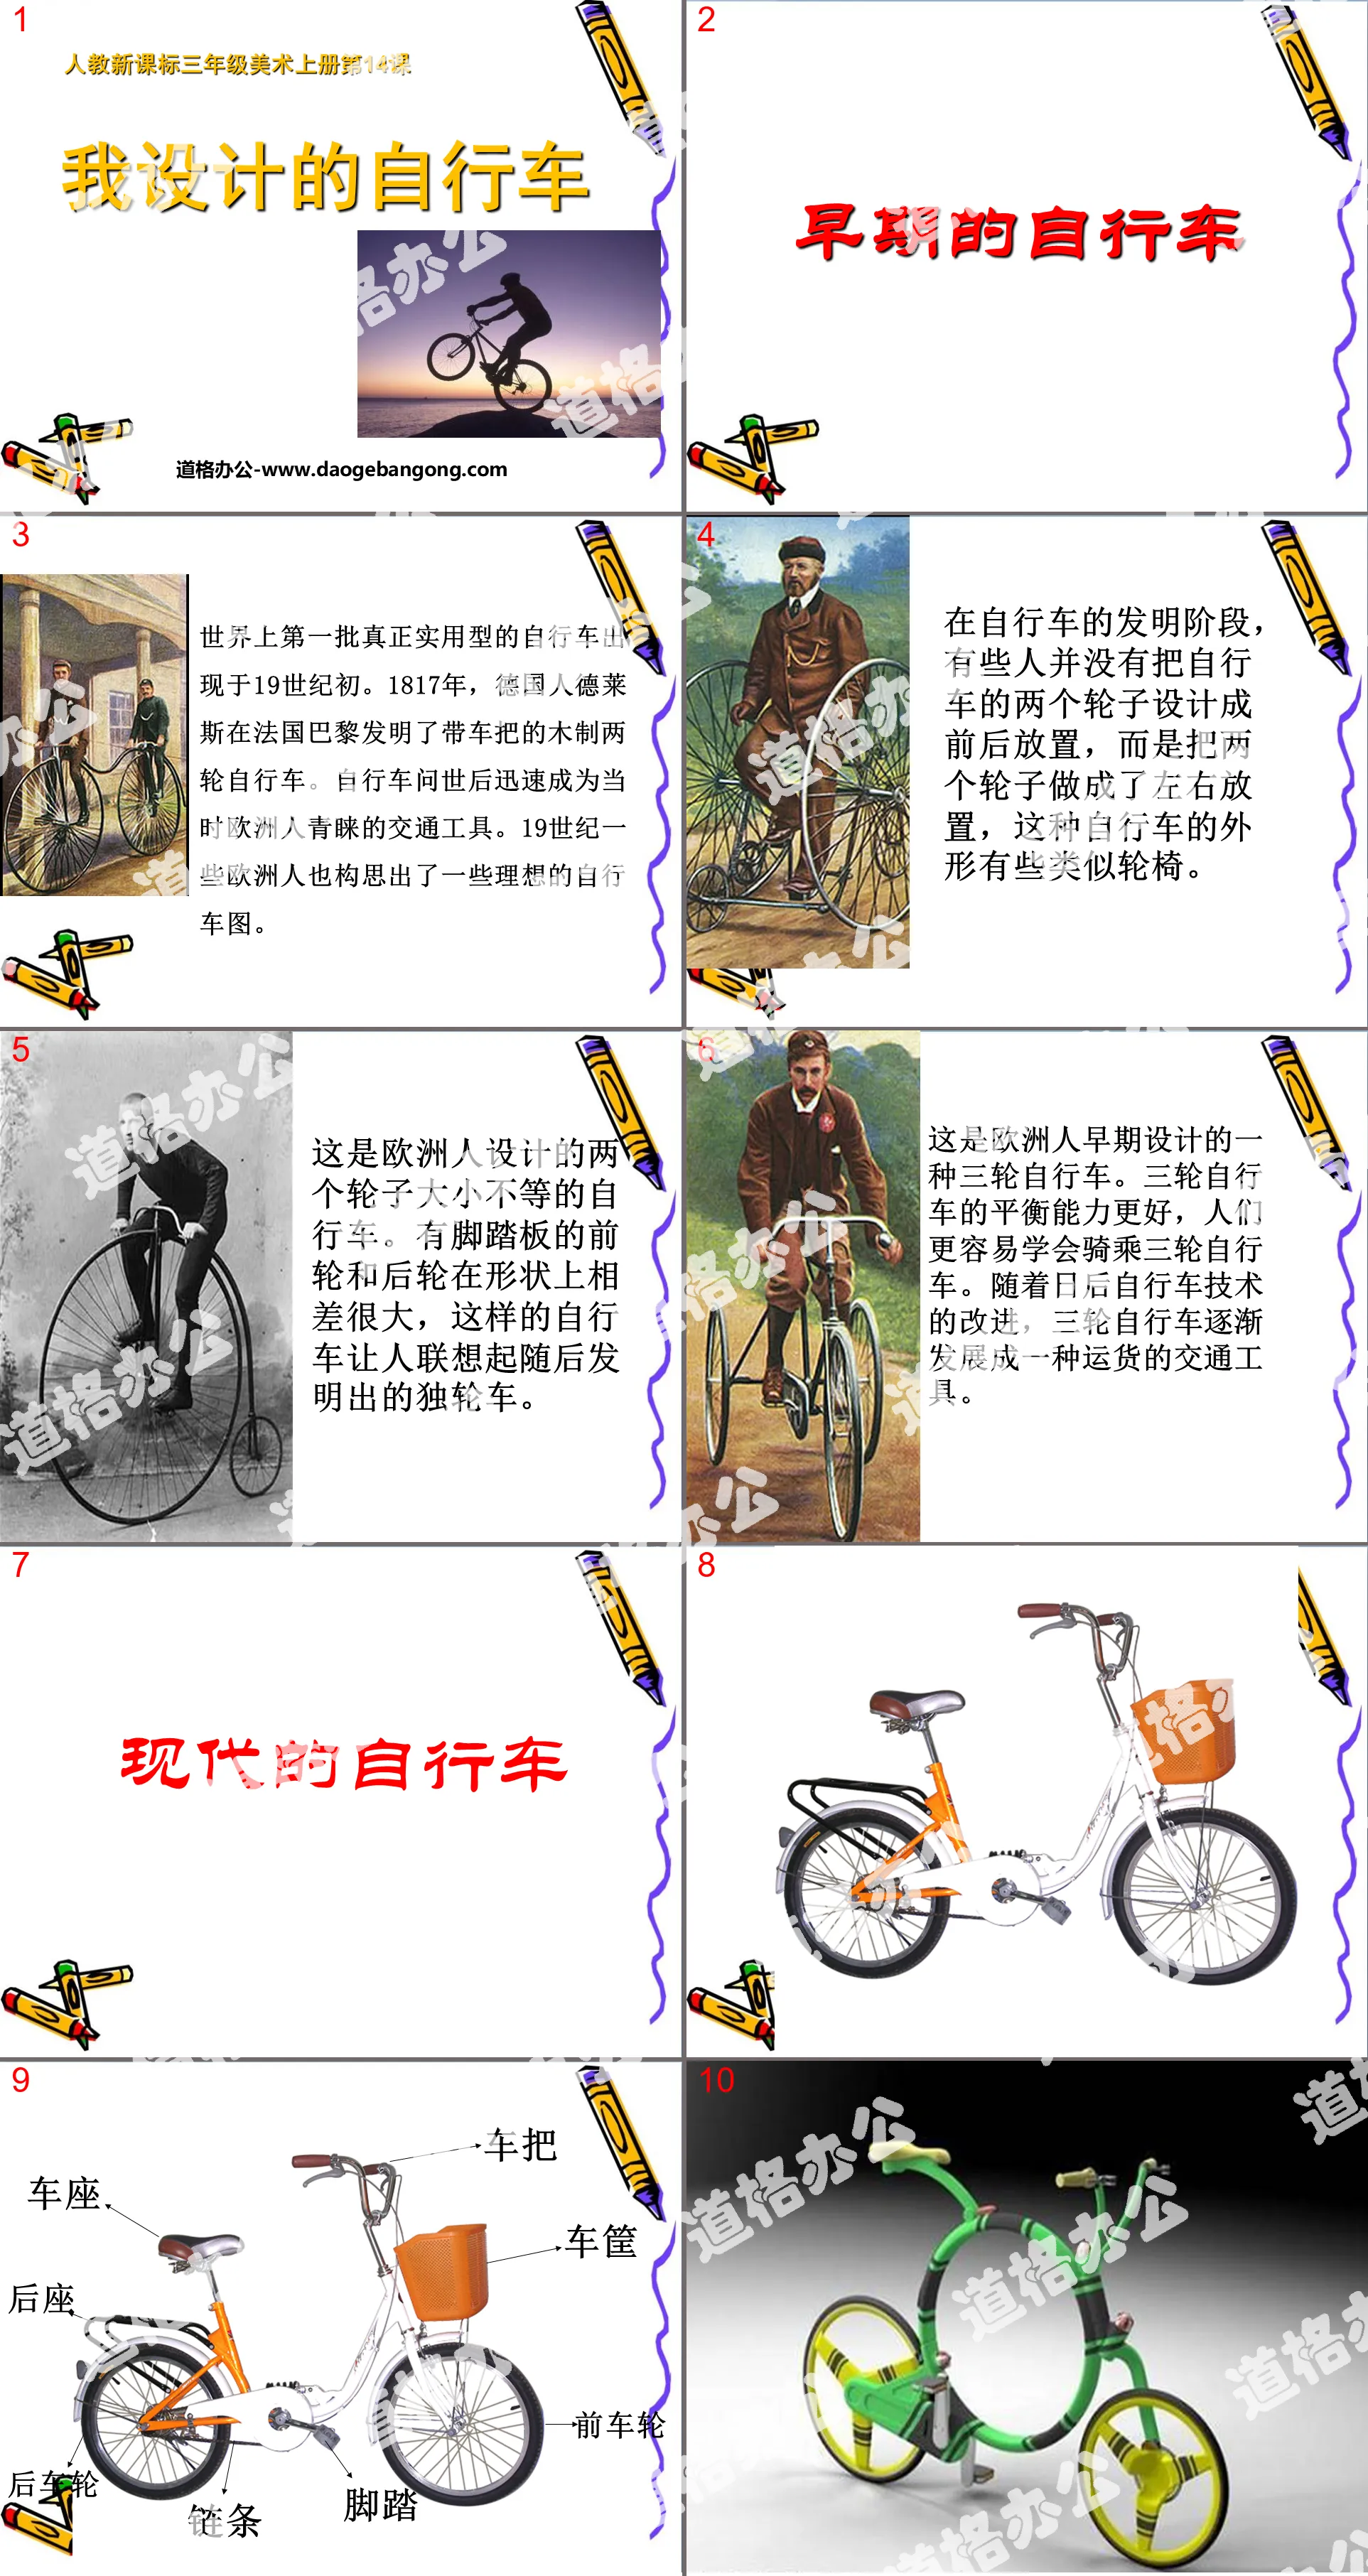 "The Bicycle I Designed" PPT courseware